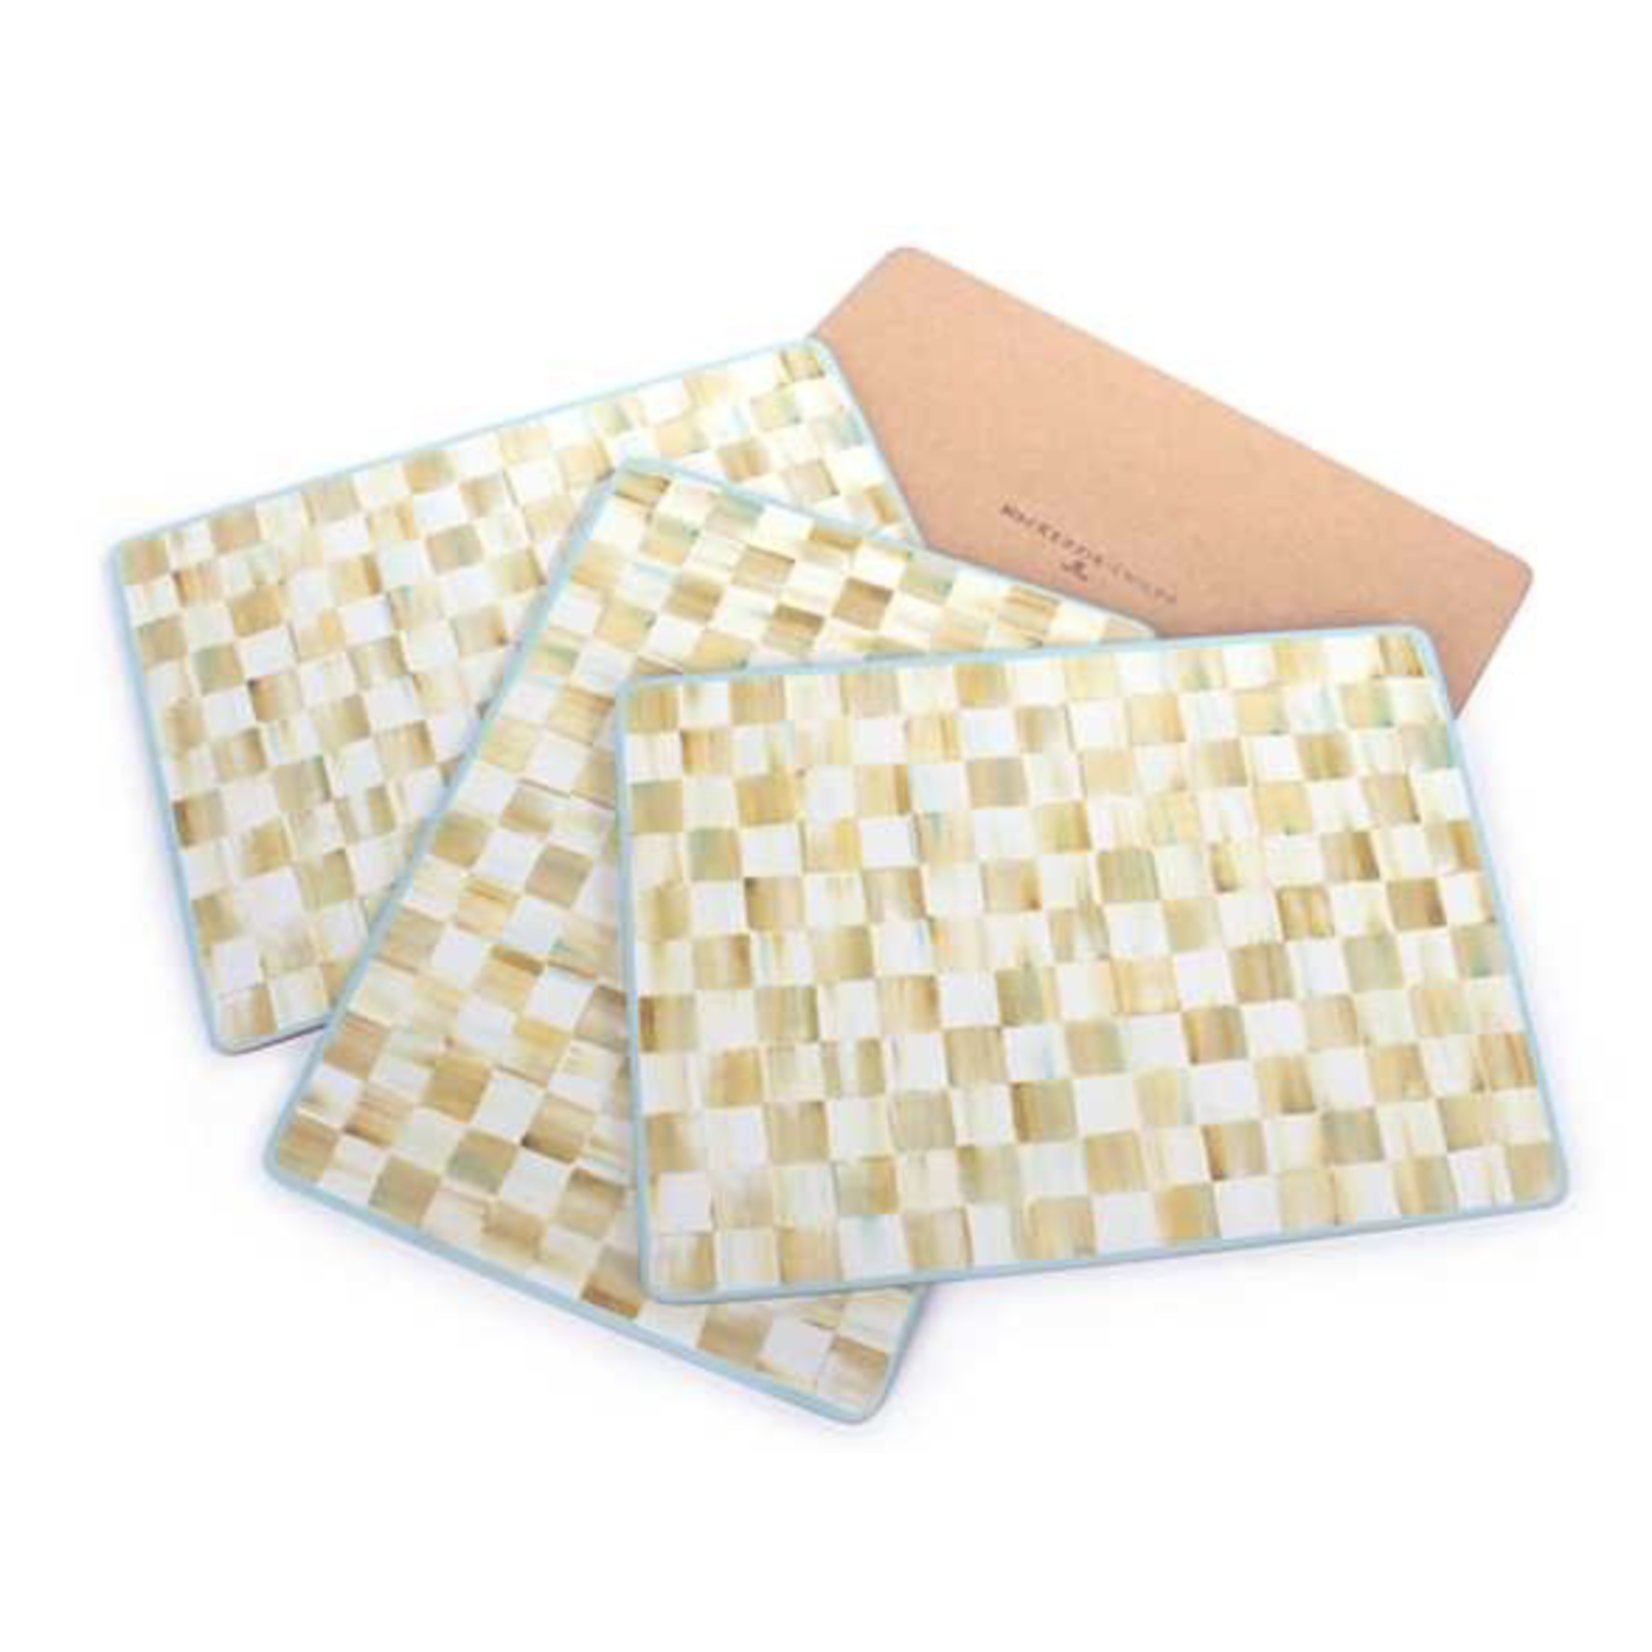 MacKenzie-Childs Parchment Check Cork Back Placemats, Set of 4